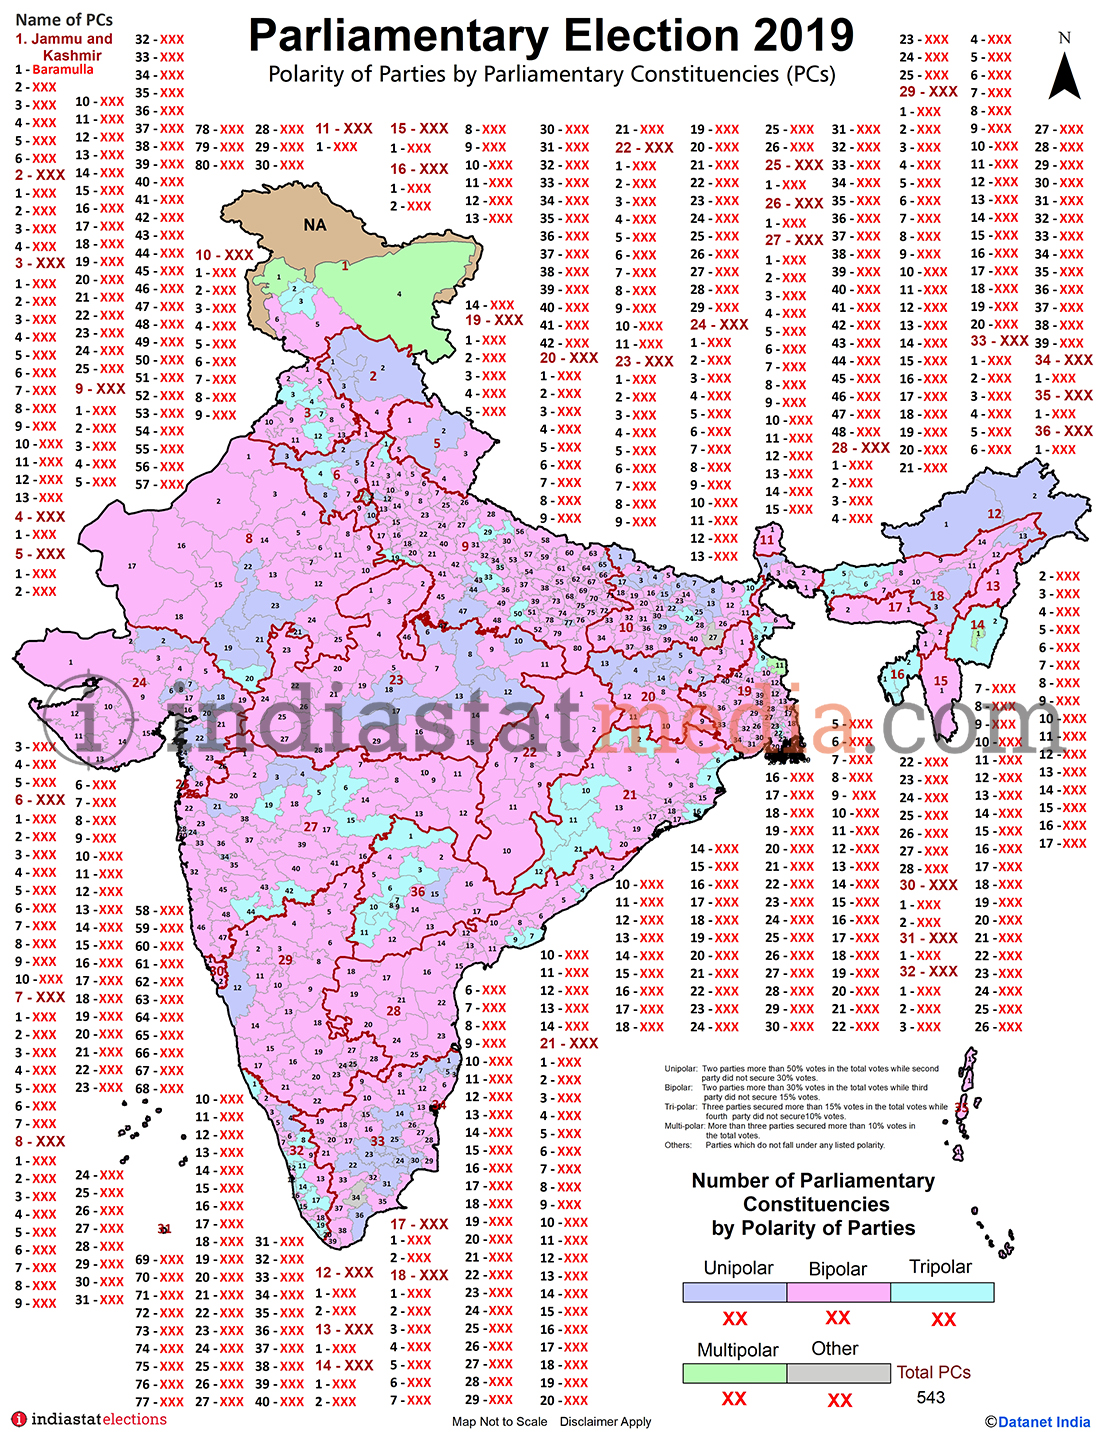 Polarity of Parties by Parliamentary Constituencies in India (Parliamentary Election - 2019)